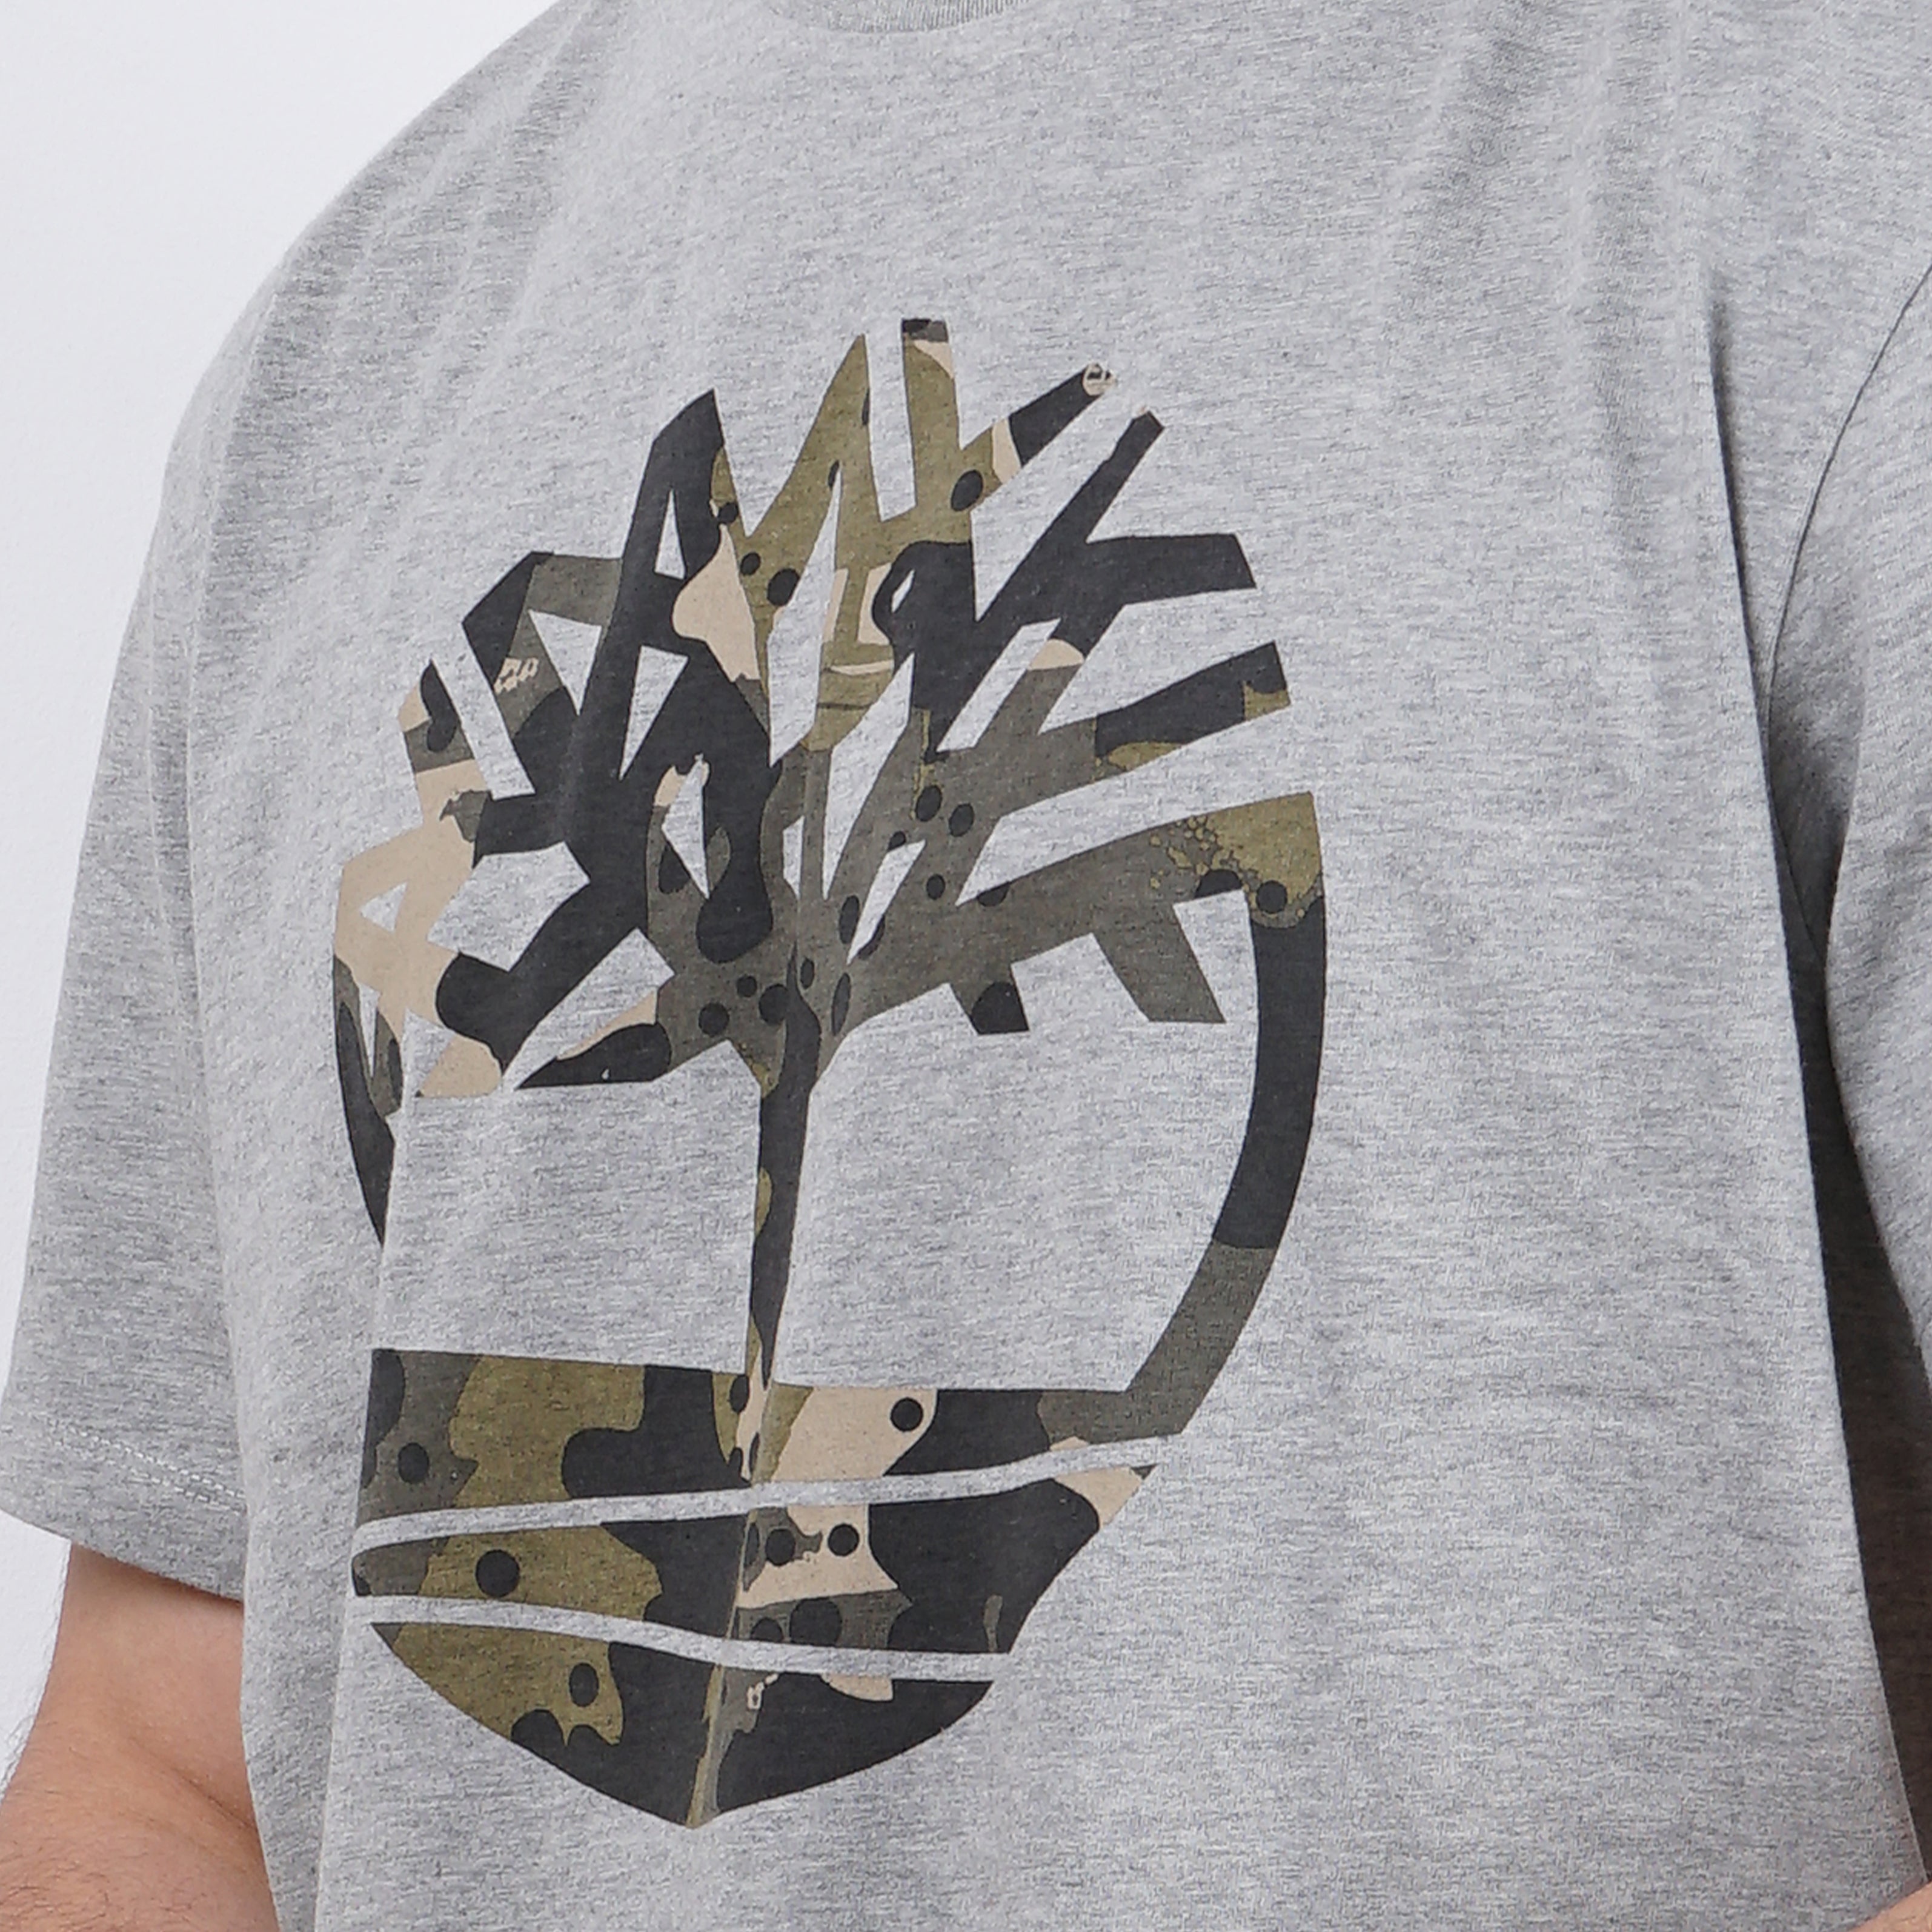 Man in gray t-shirt with camouflage Timberland design.